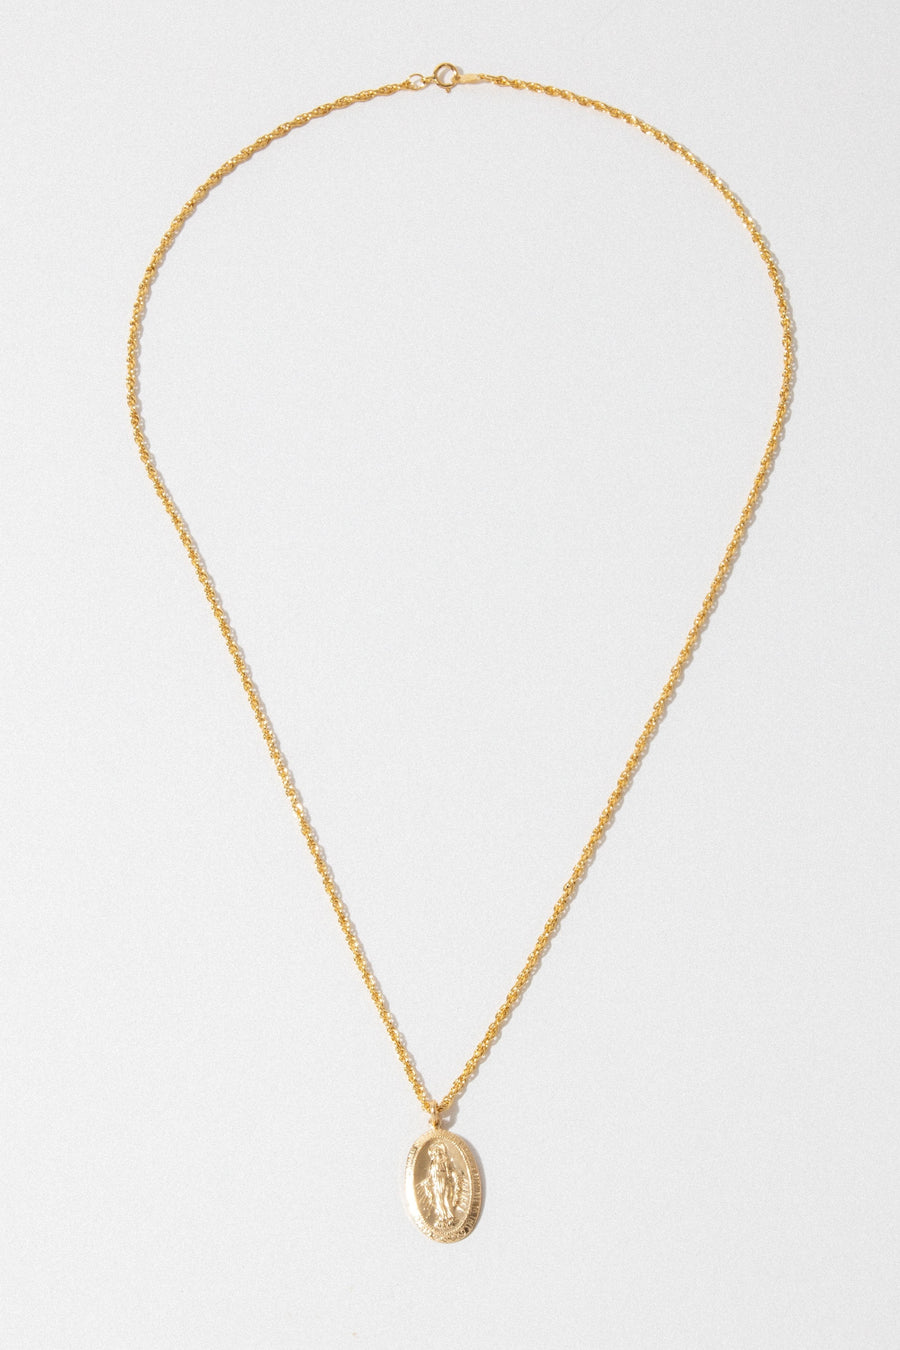 CGM Jewelry The Mary Necklace